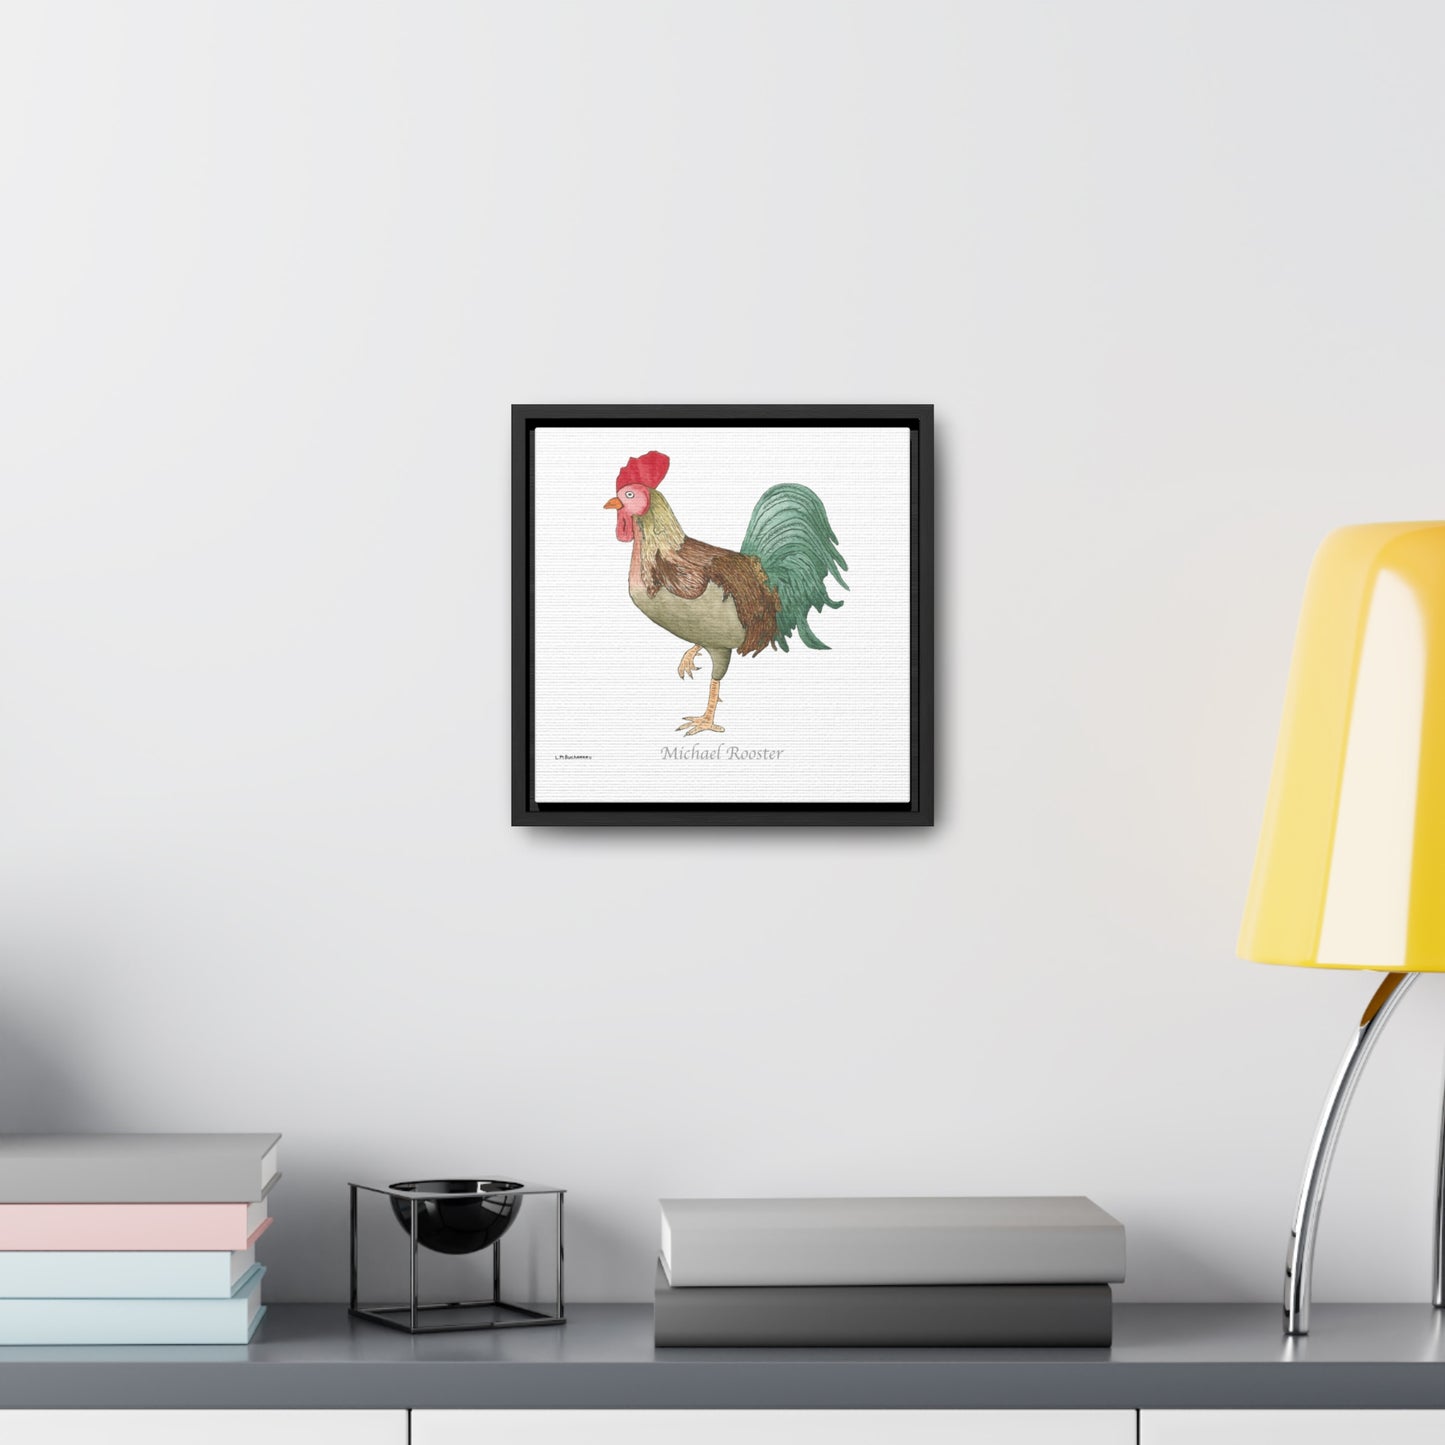 Michael Rooster Gallery Canvas Wraps